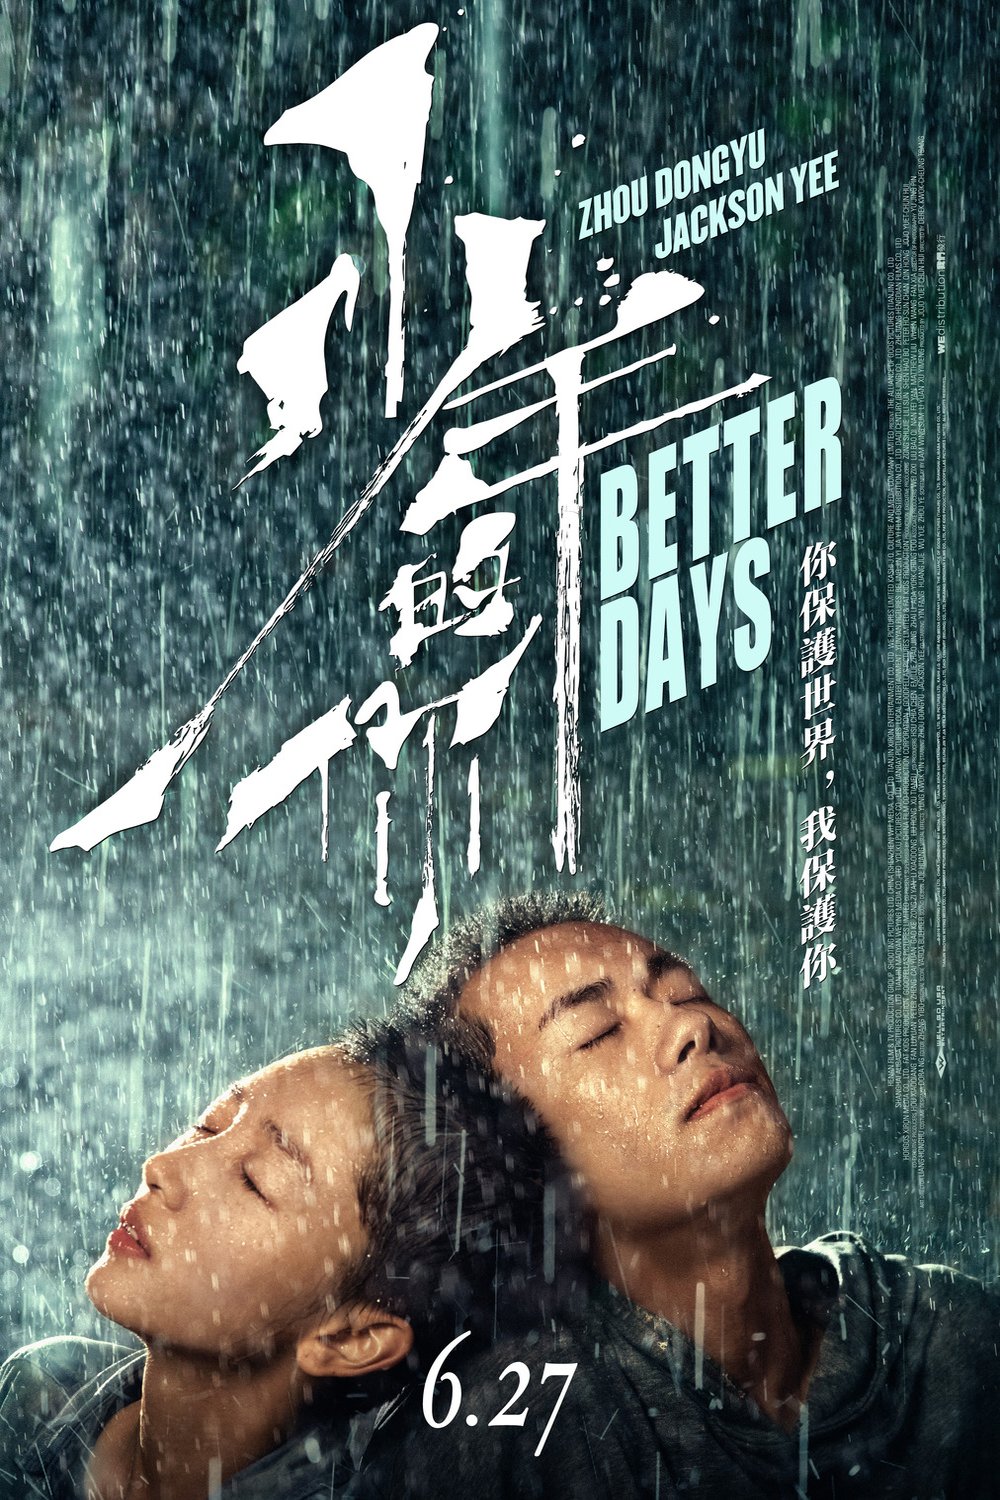 Poster of the movie Better Days